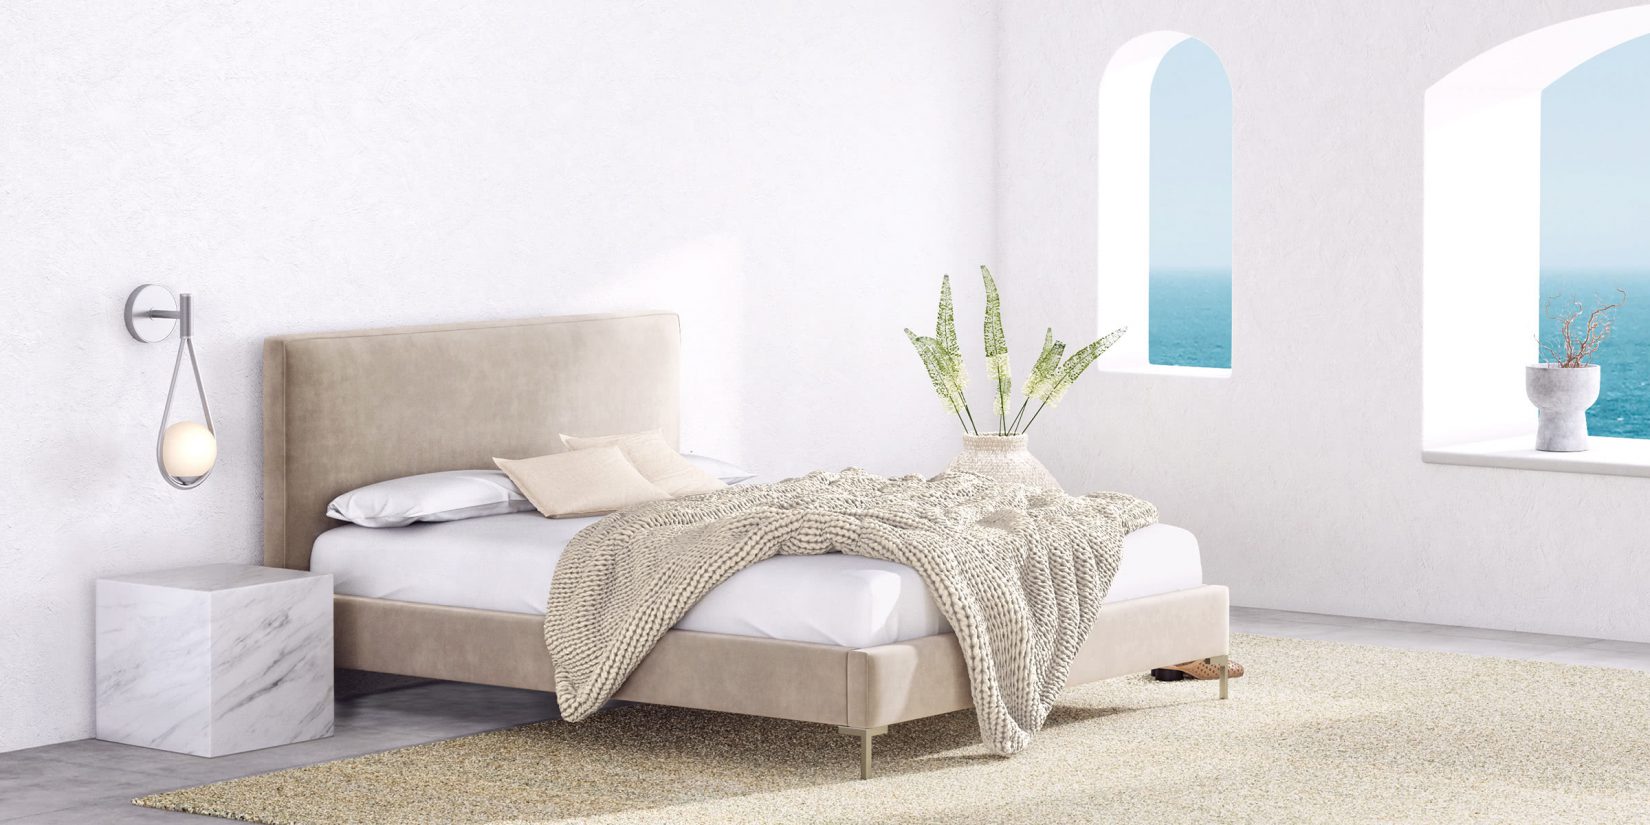 15 Dreamy Luxury Mattresses For Serene and Restful Sleep